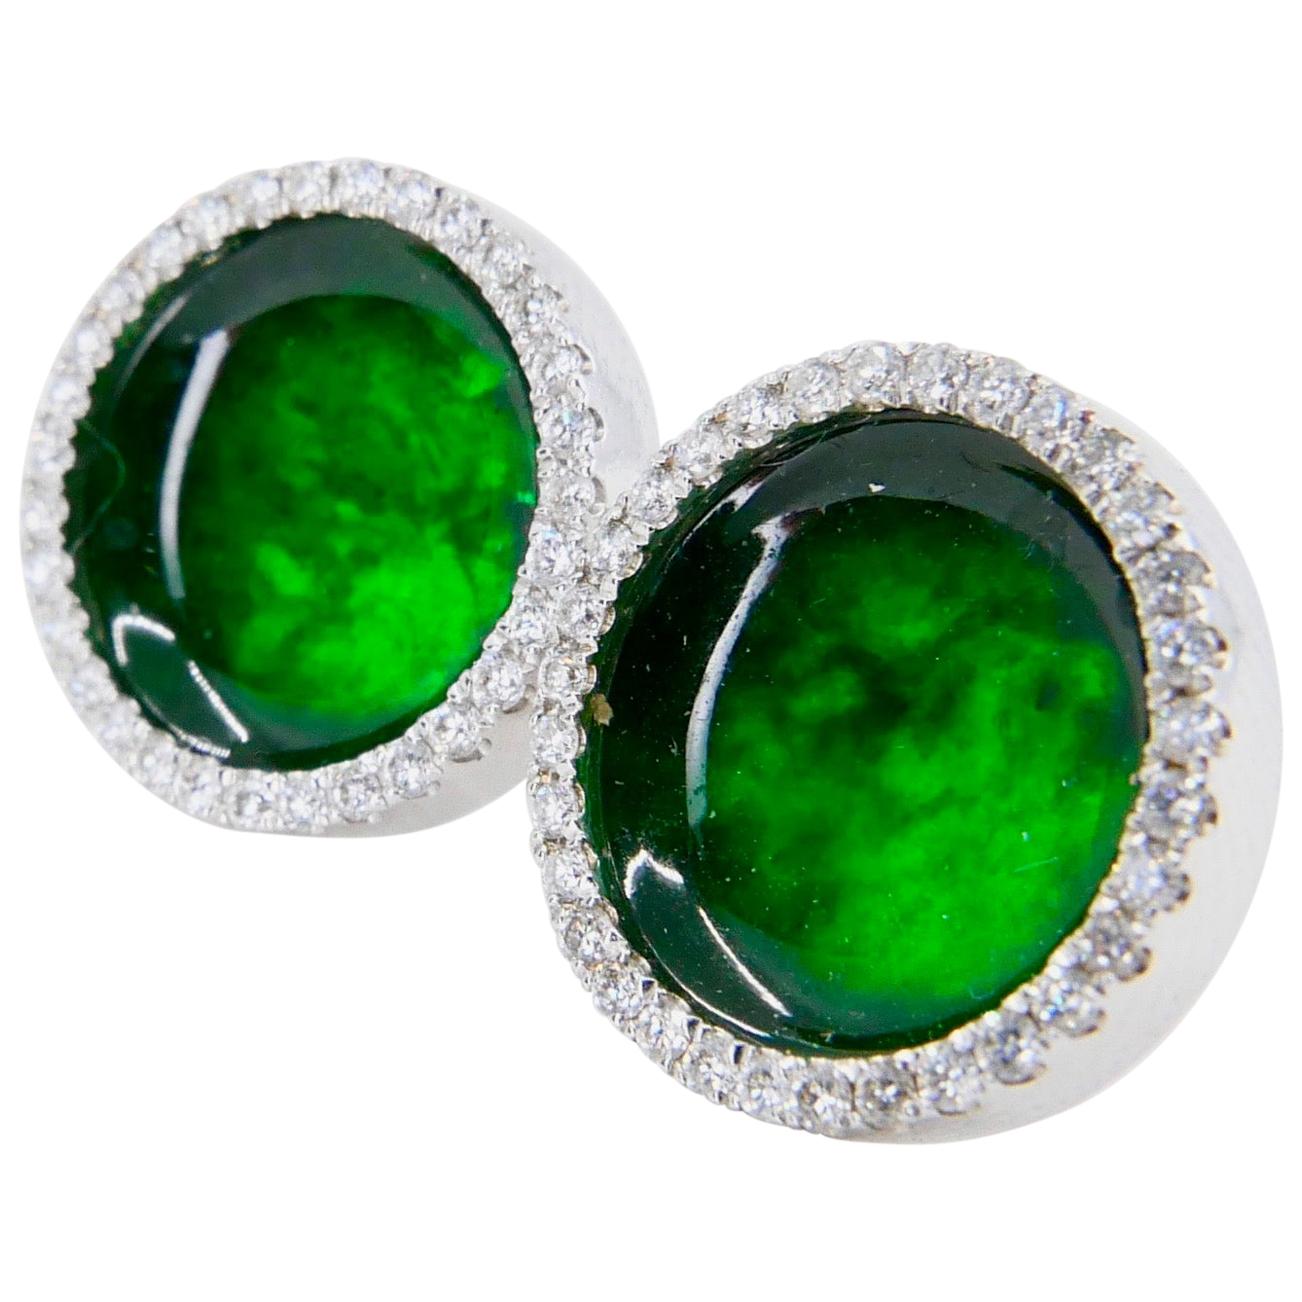 Round Cut Certified Natural Jadeite Type A Jade and Diamond Earrings, Spinach Green Color